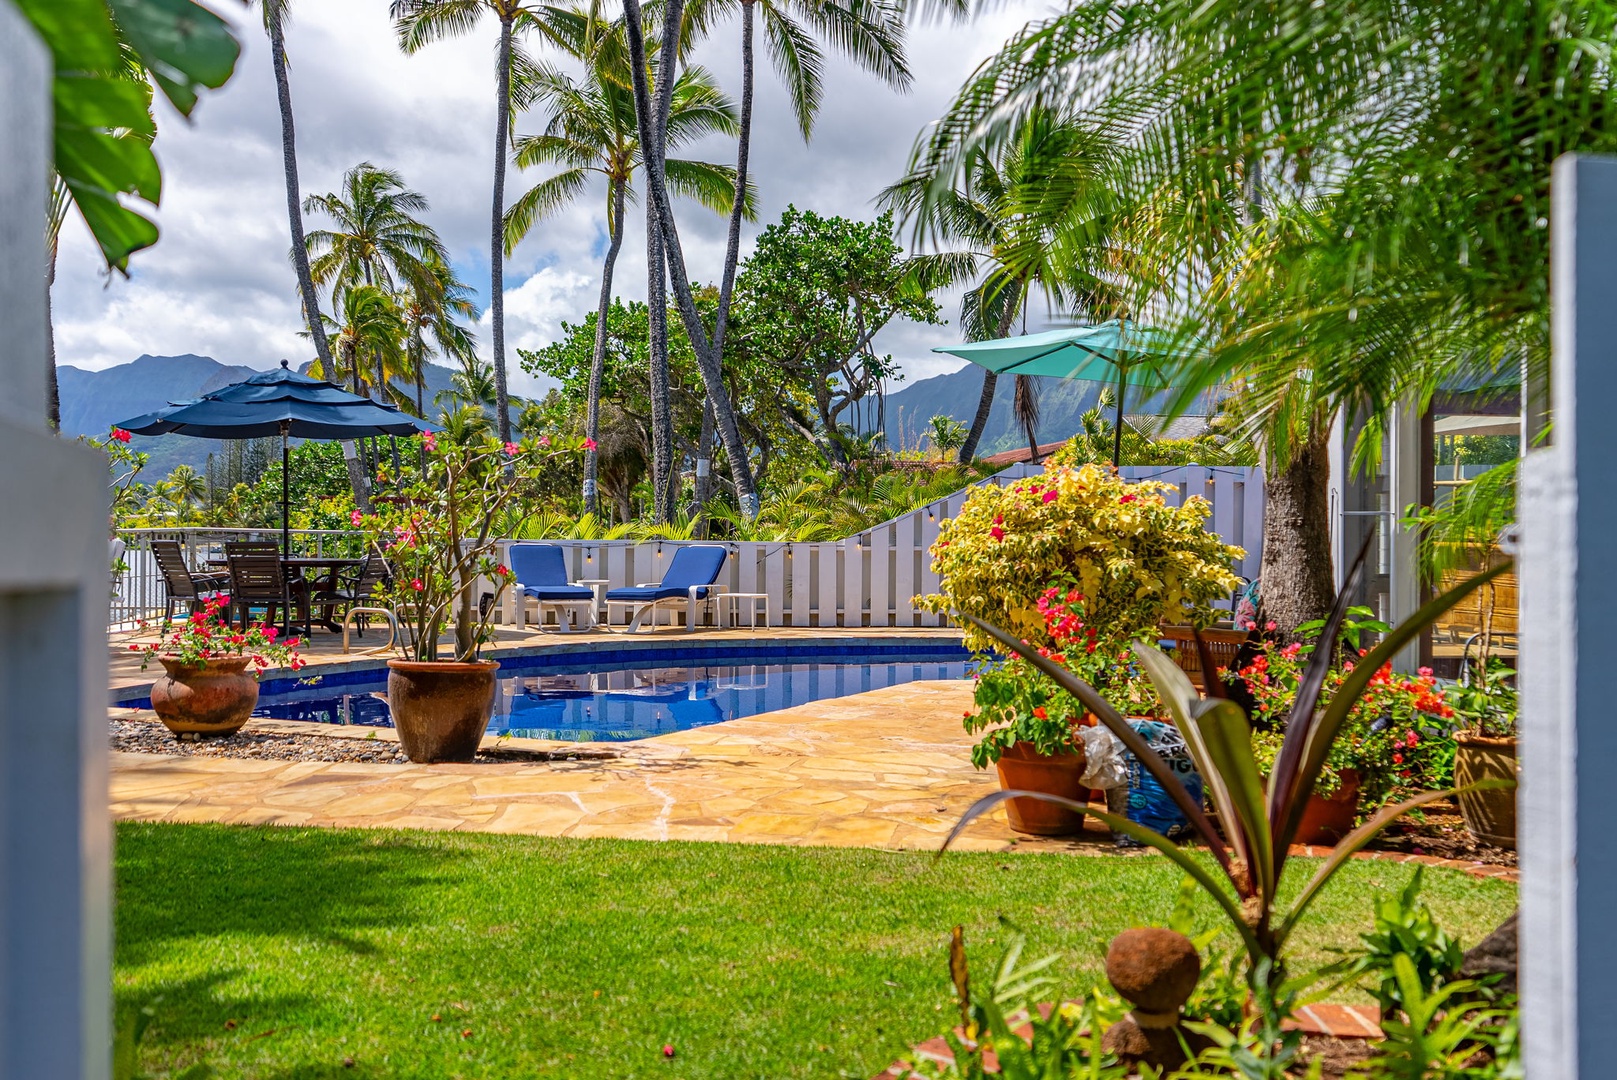 Kailua Vacation Rentals, Hale Aloha - Relax and unwind by the inviting pool.